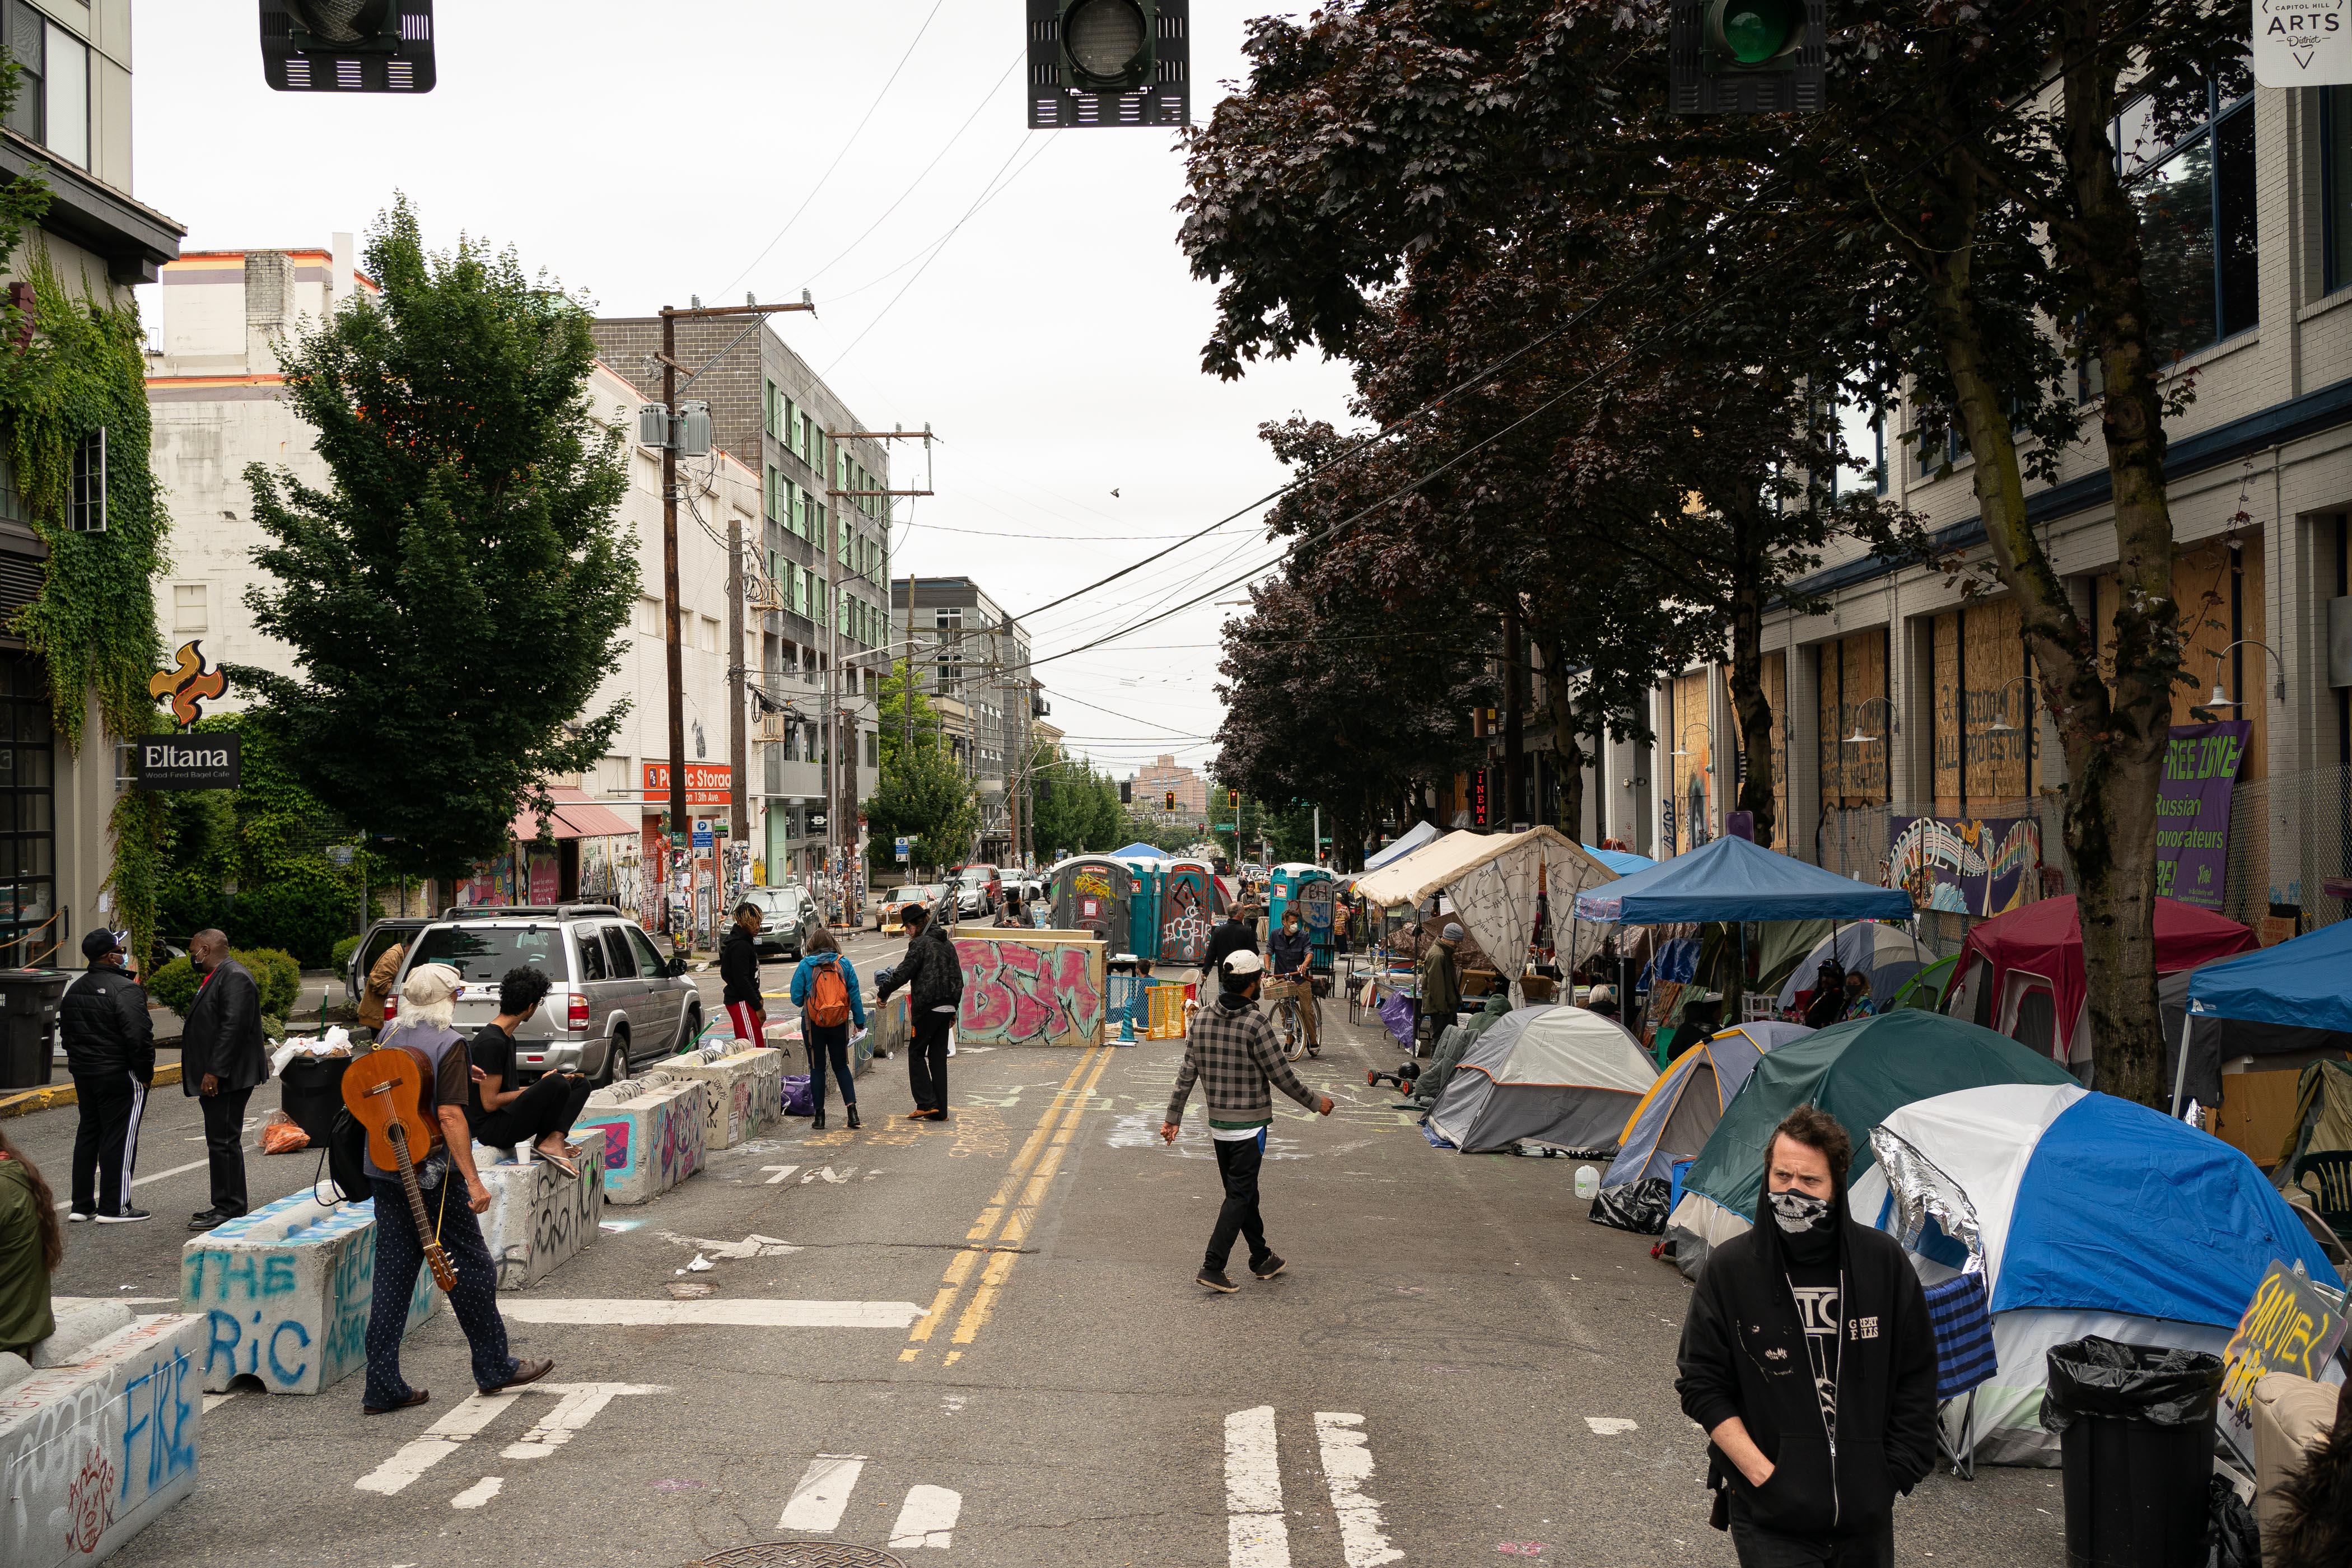 People walk around a street lined with tents.